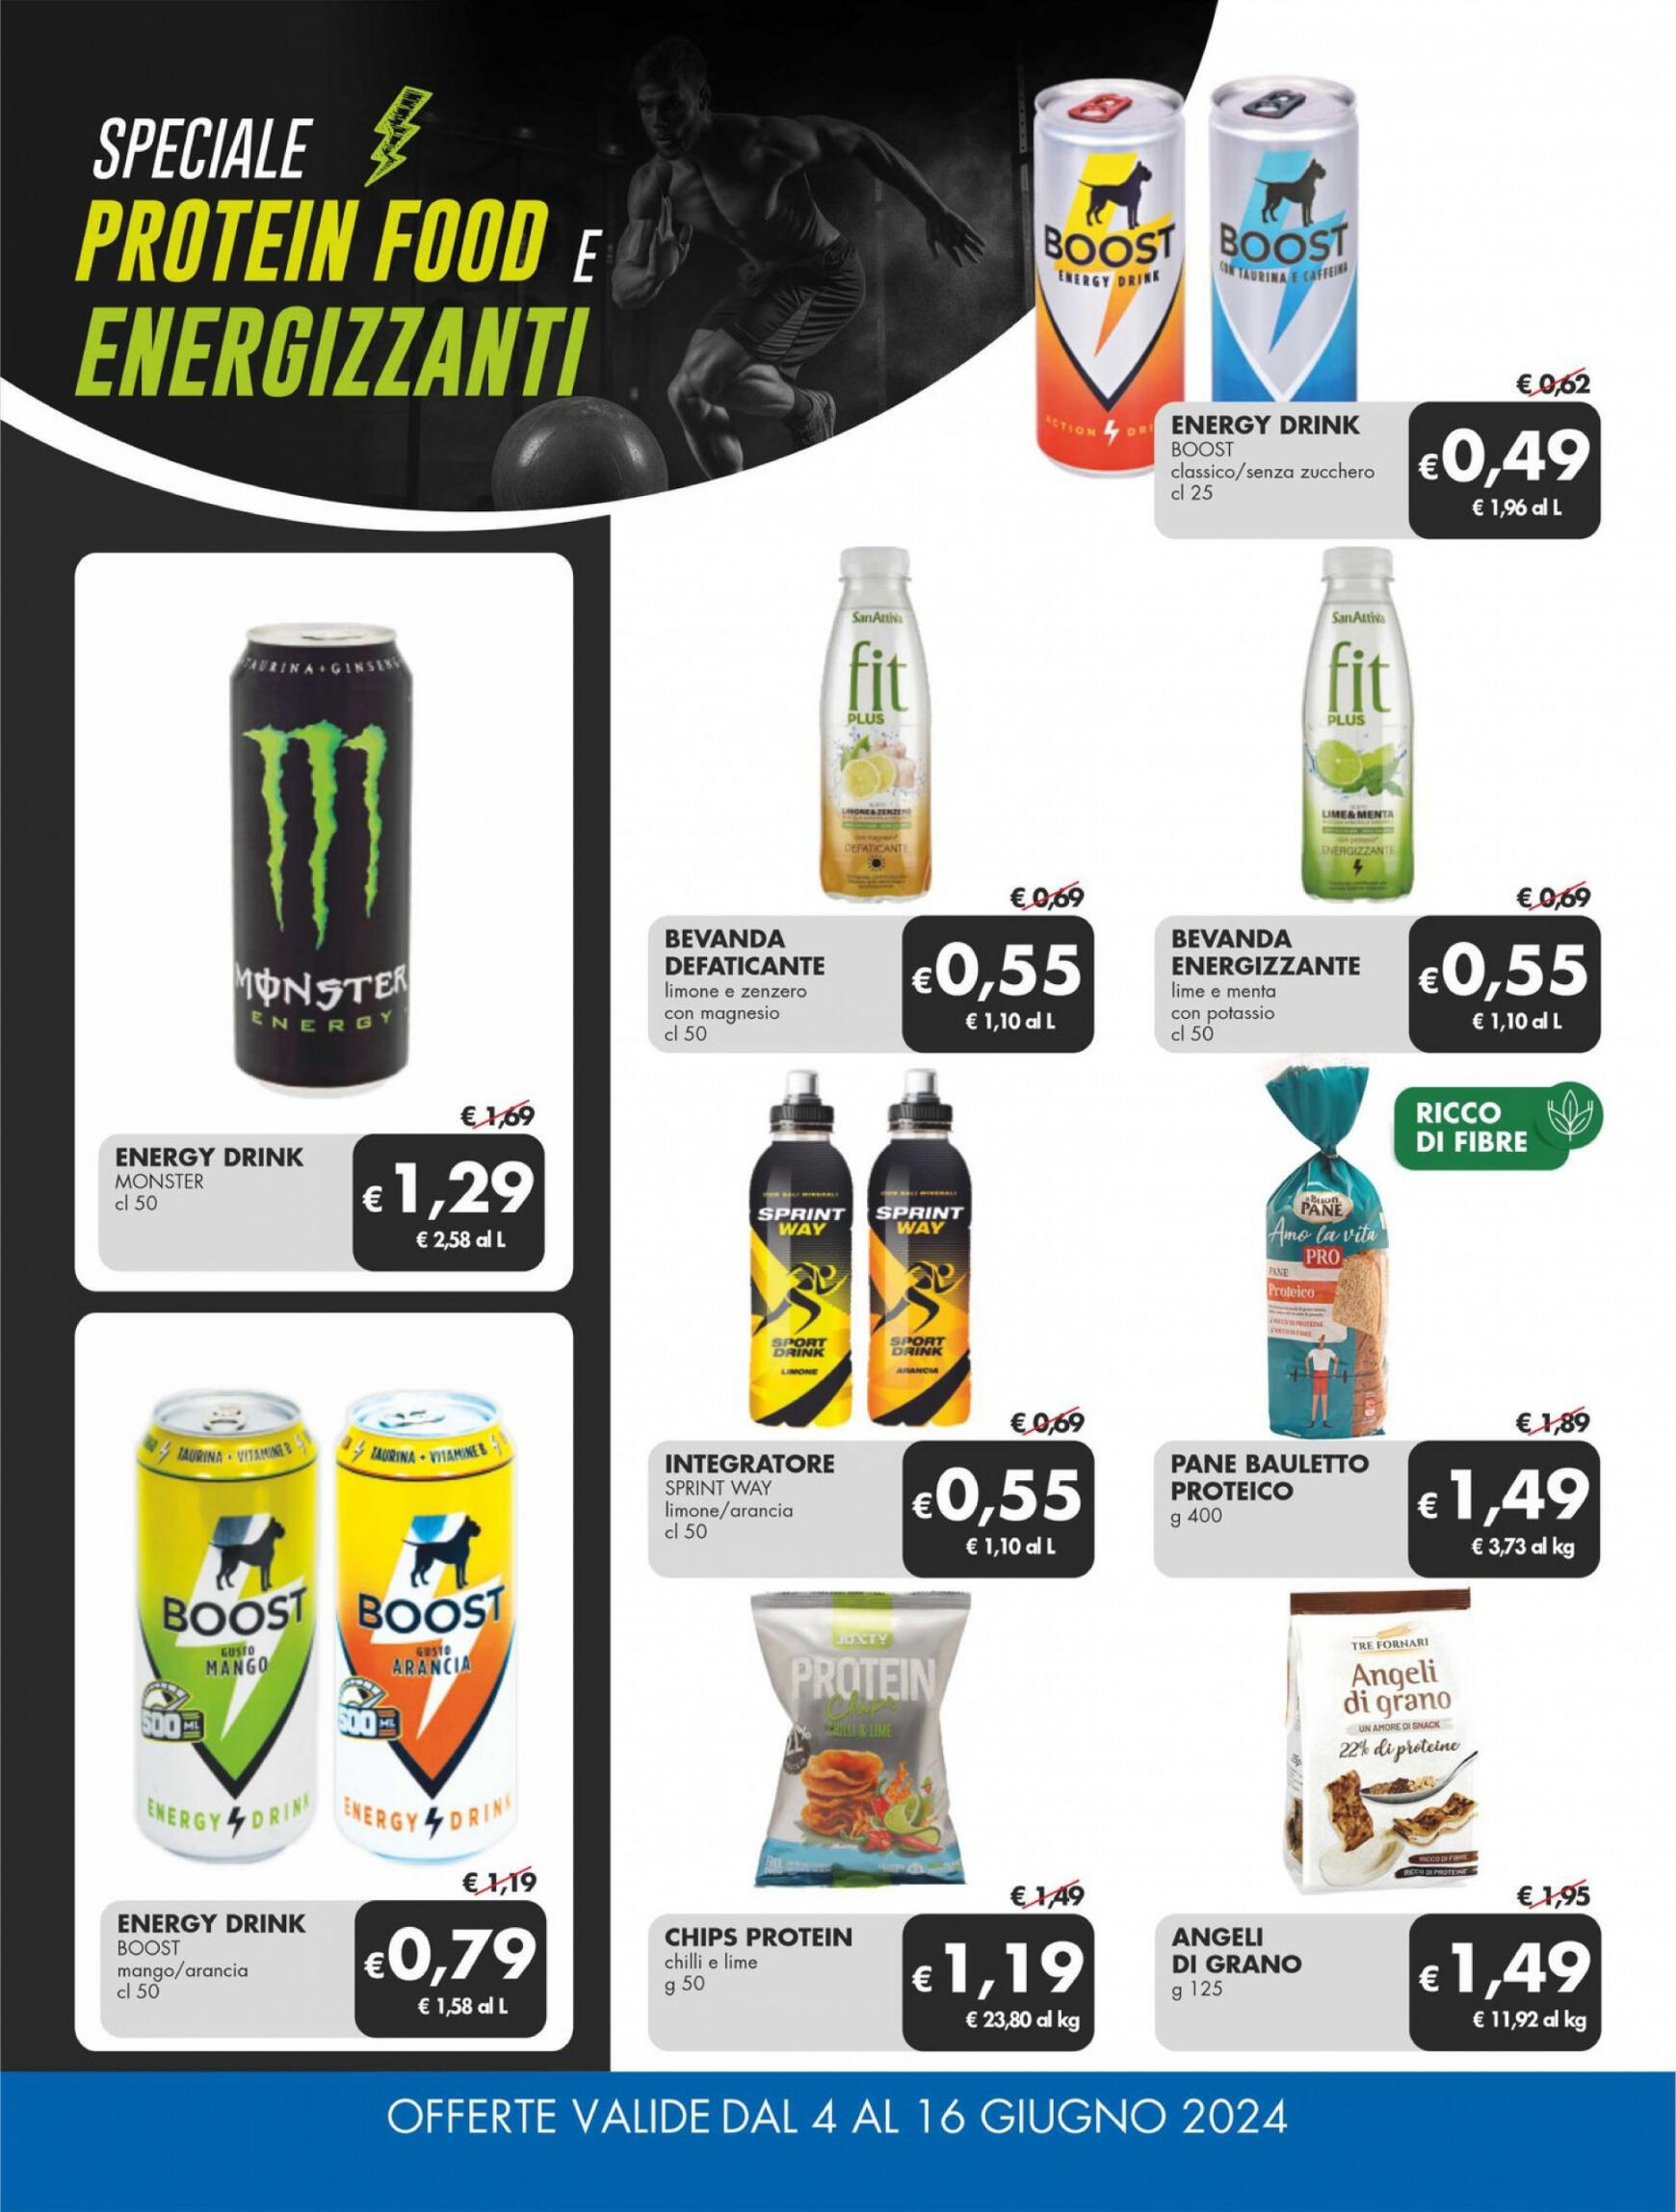 md-discount - Nuovo volantino MD 04.06. - 16.06. - page: 6